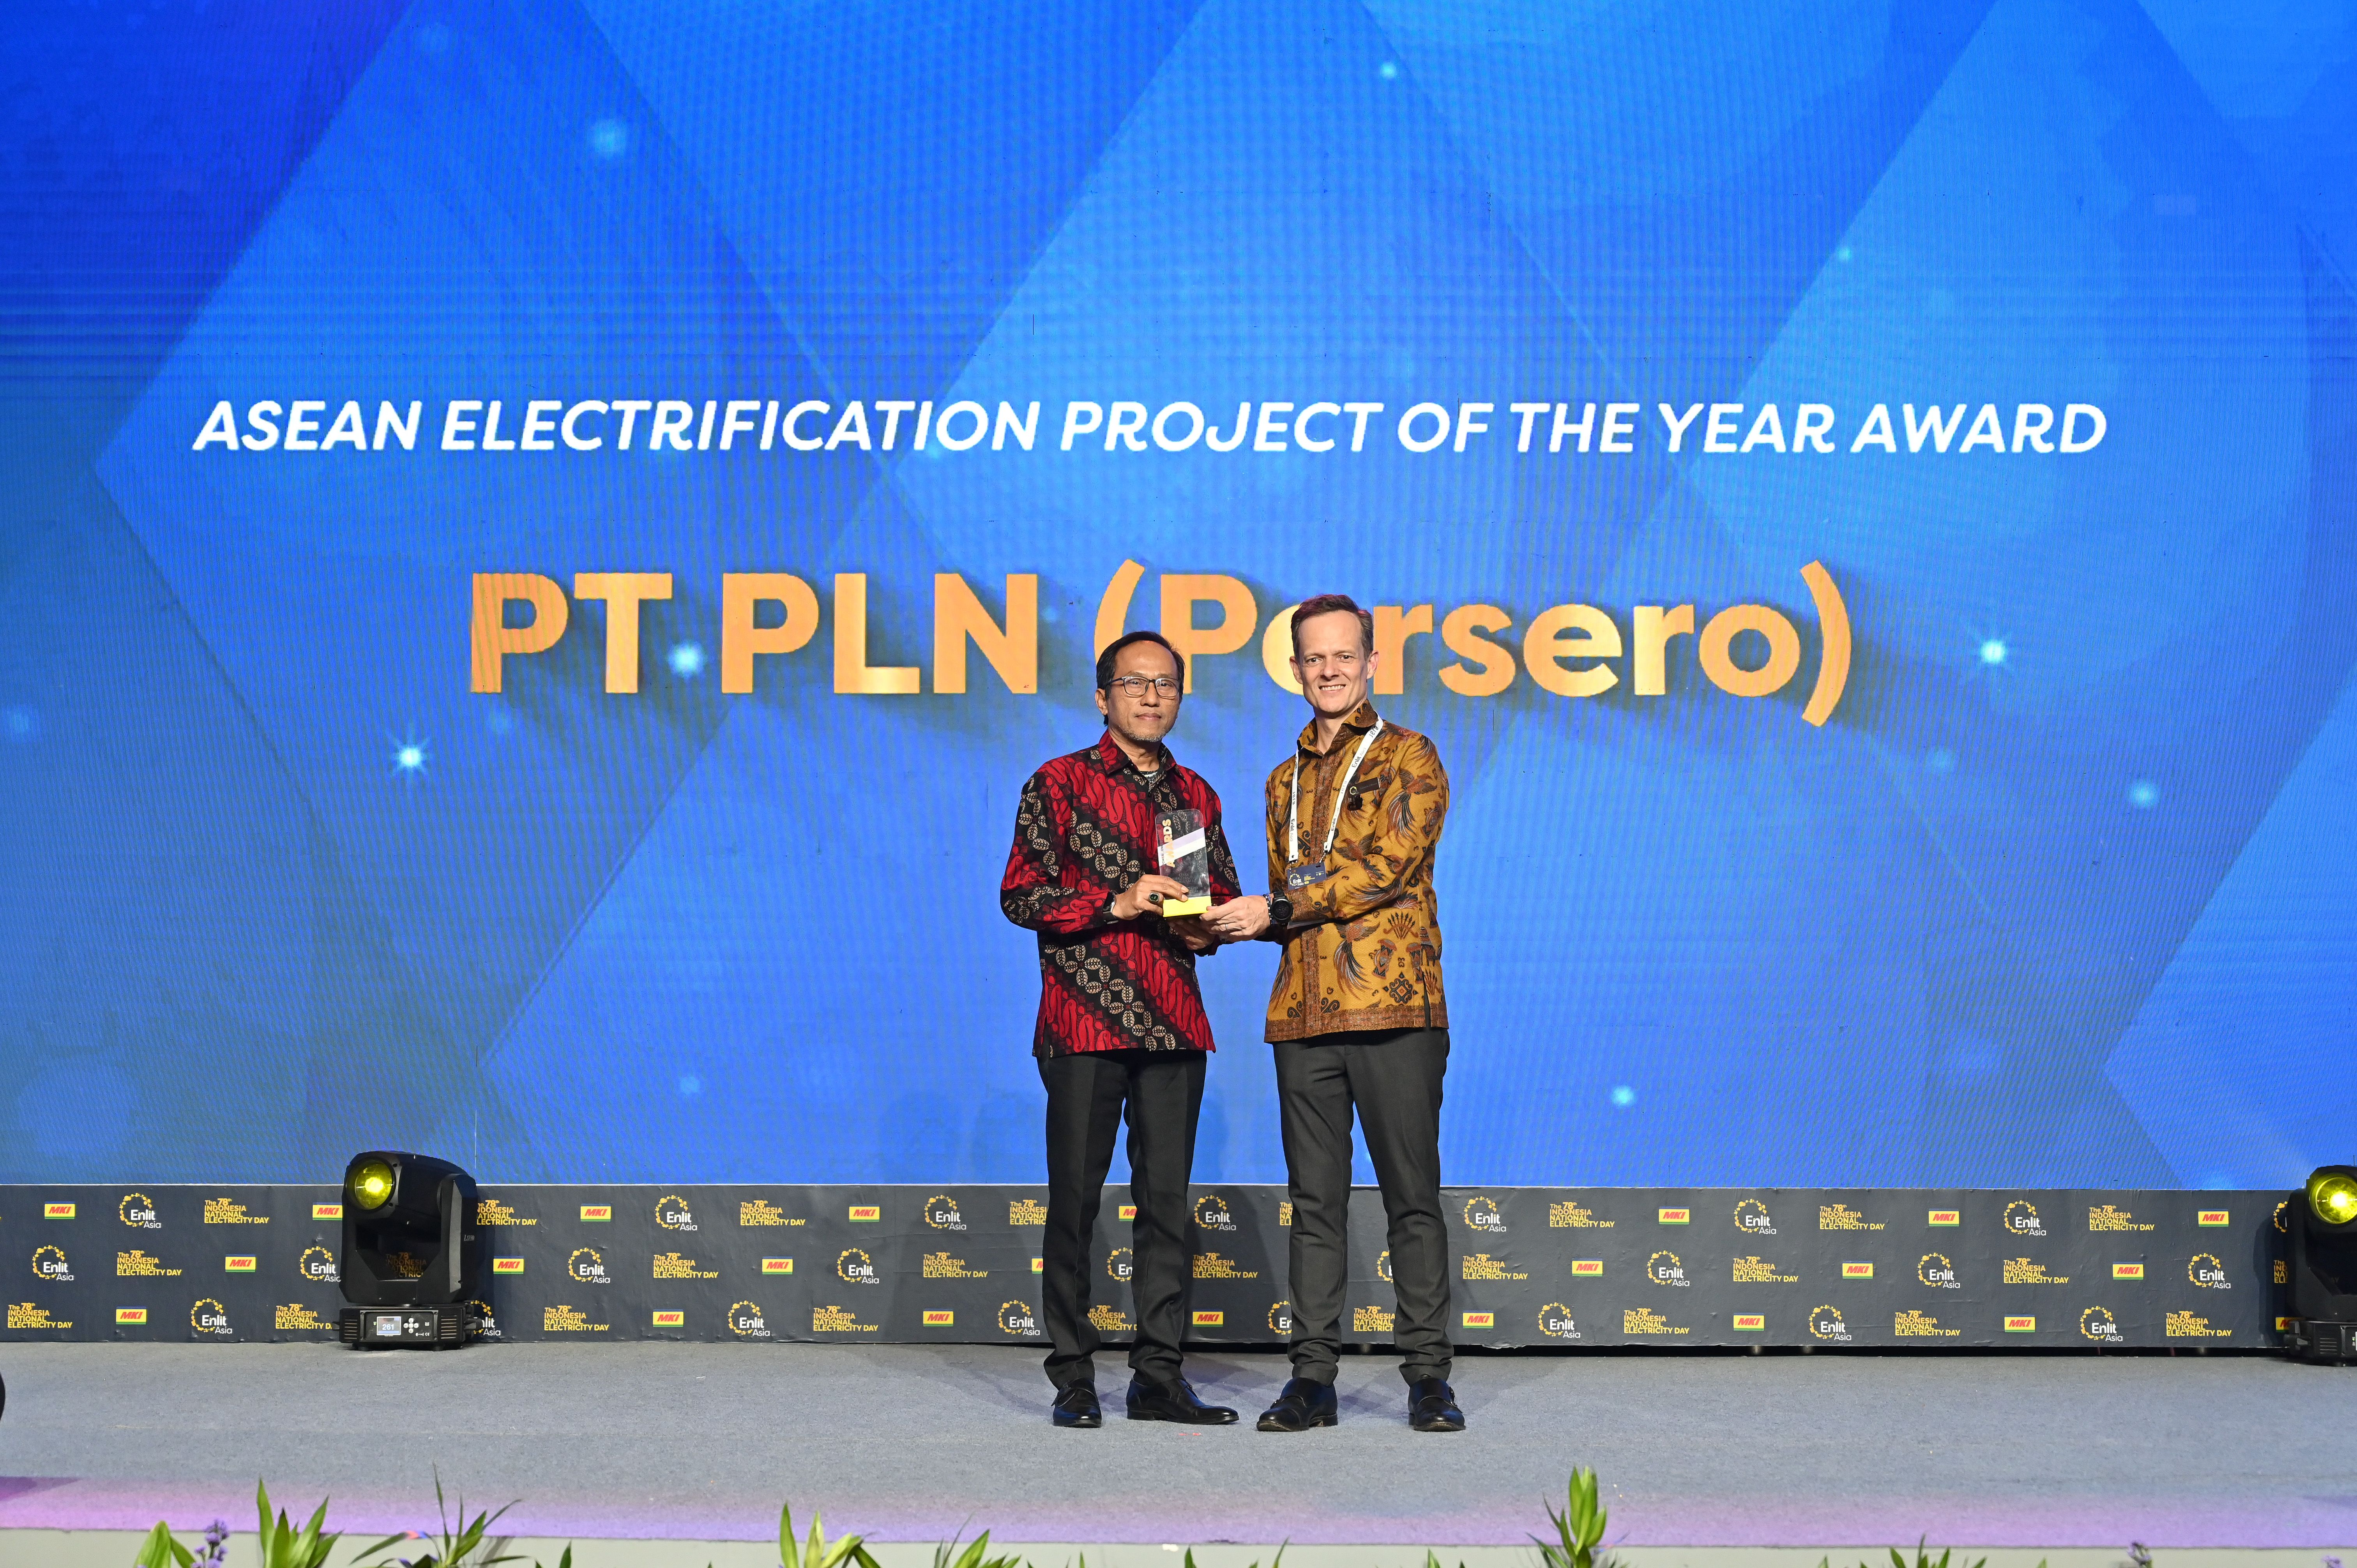 ASEAN Electrification Project of the Year